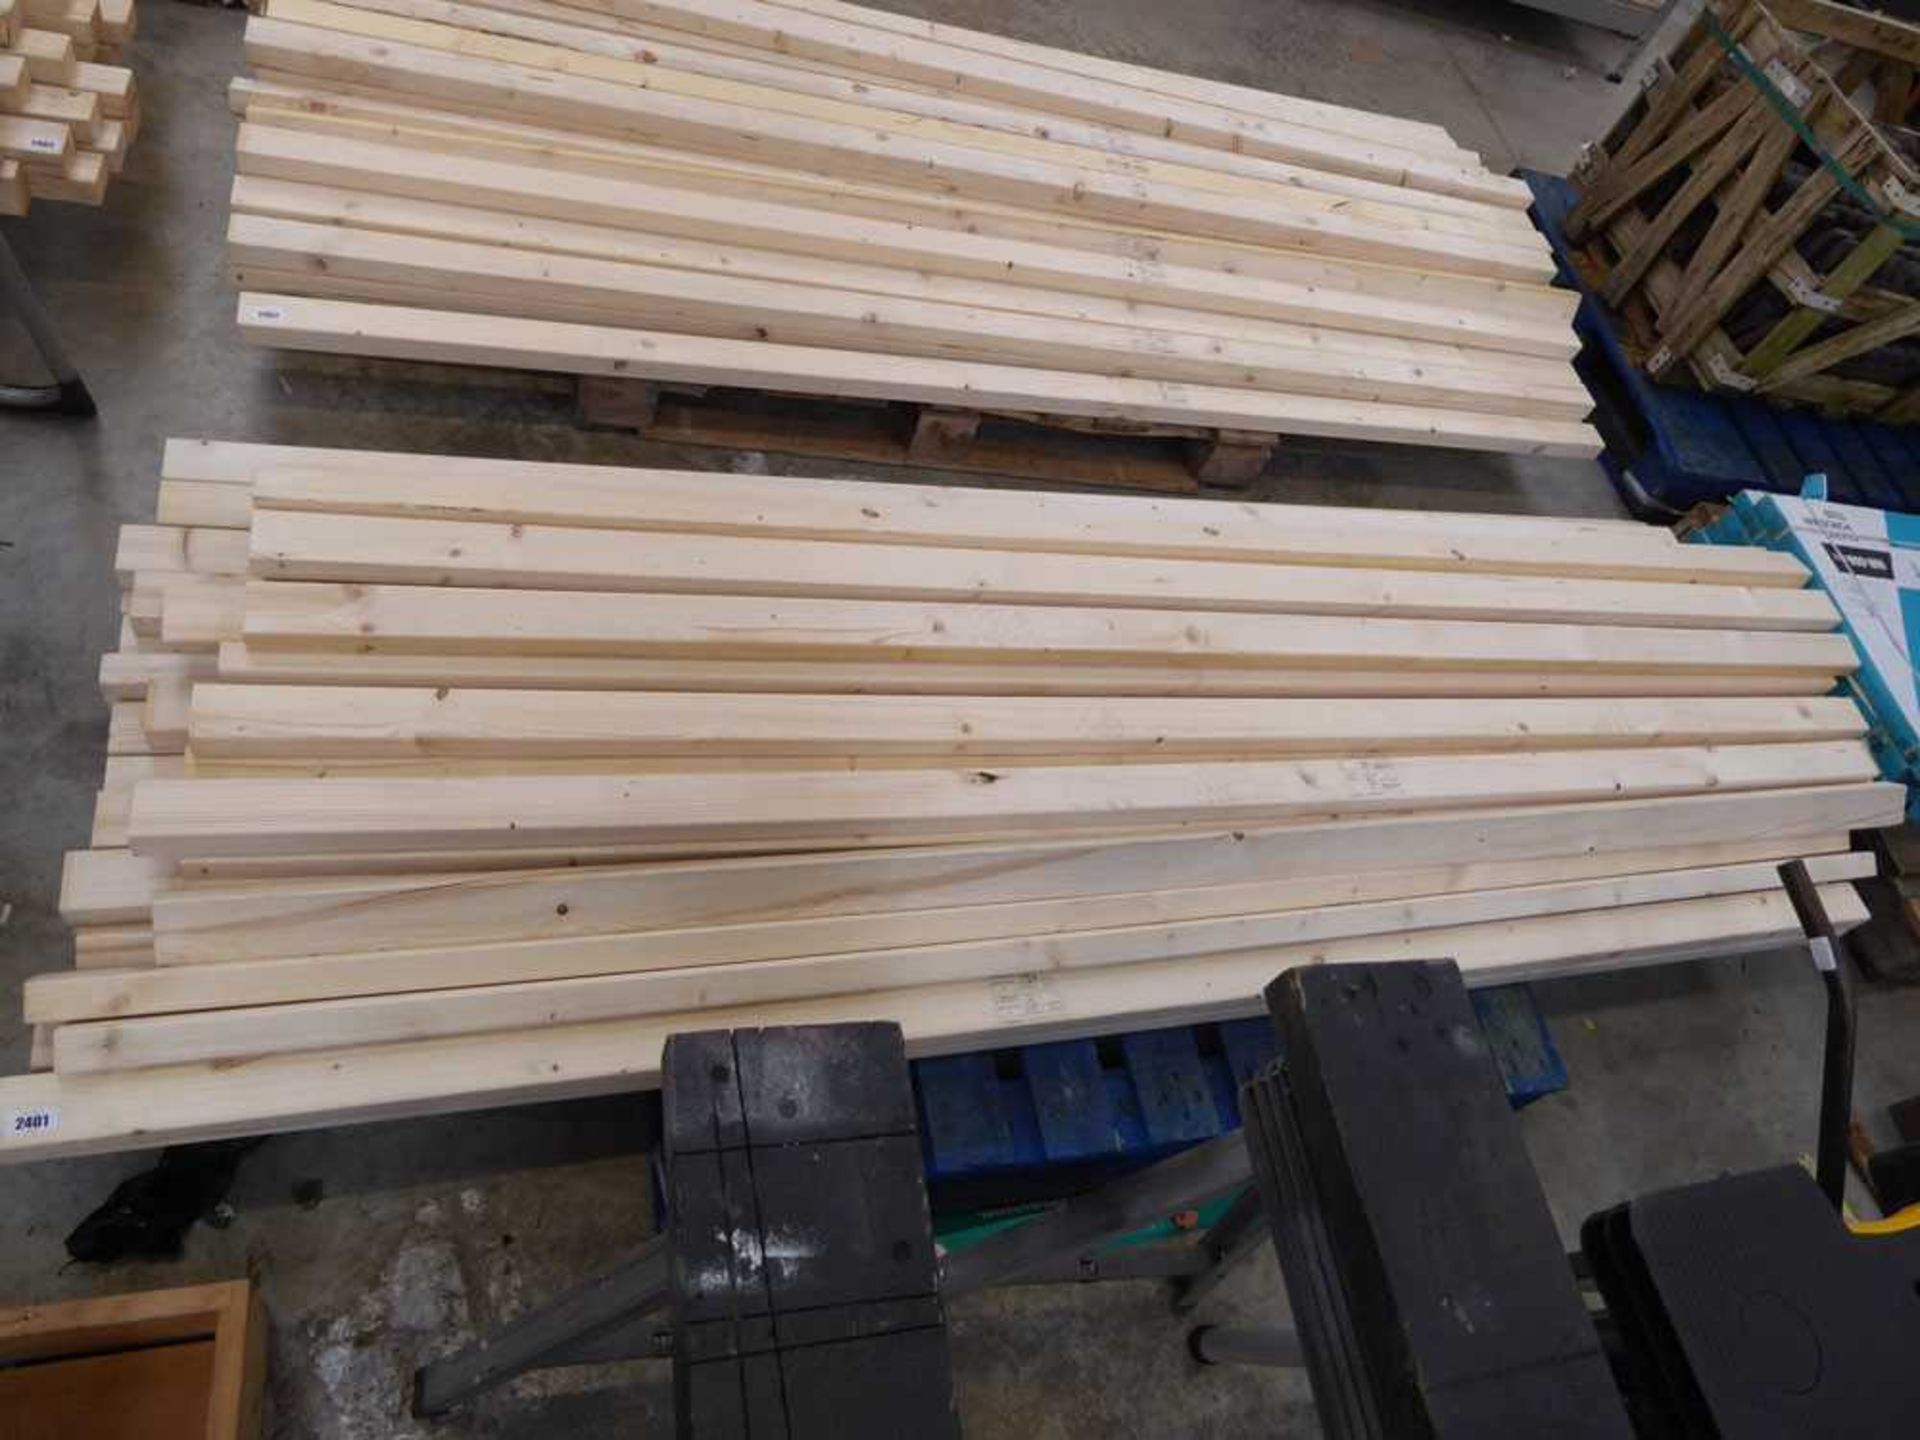 40 lengths of CLS stud timber